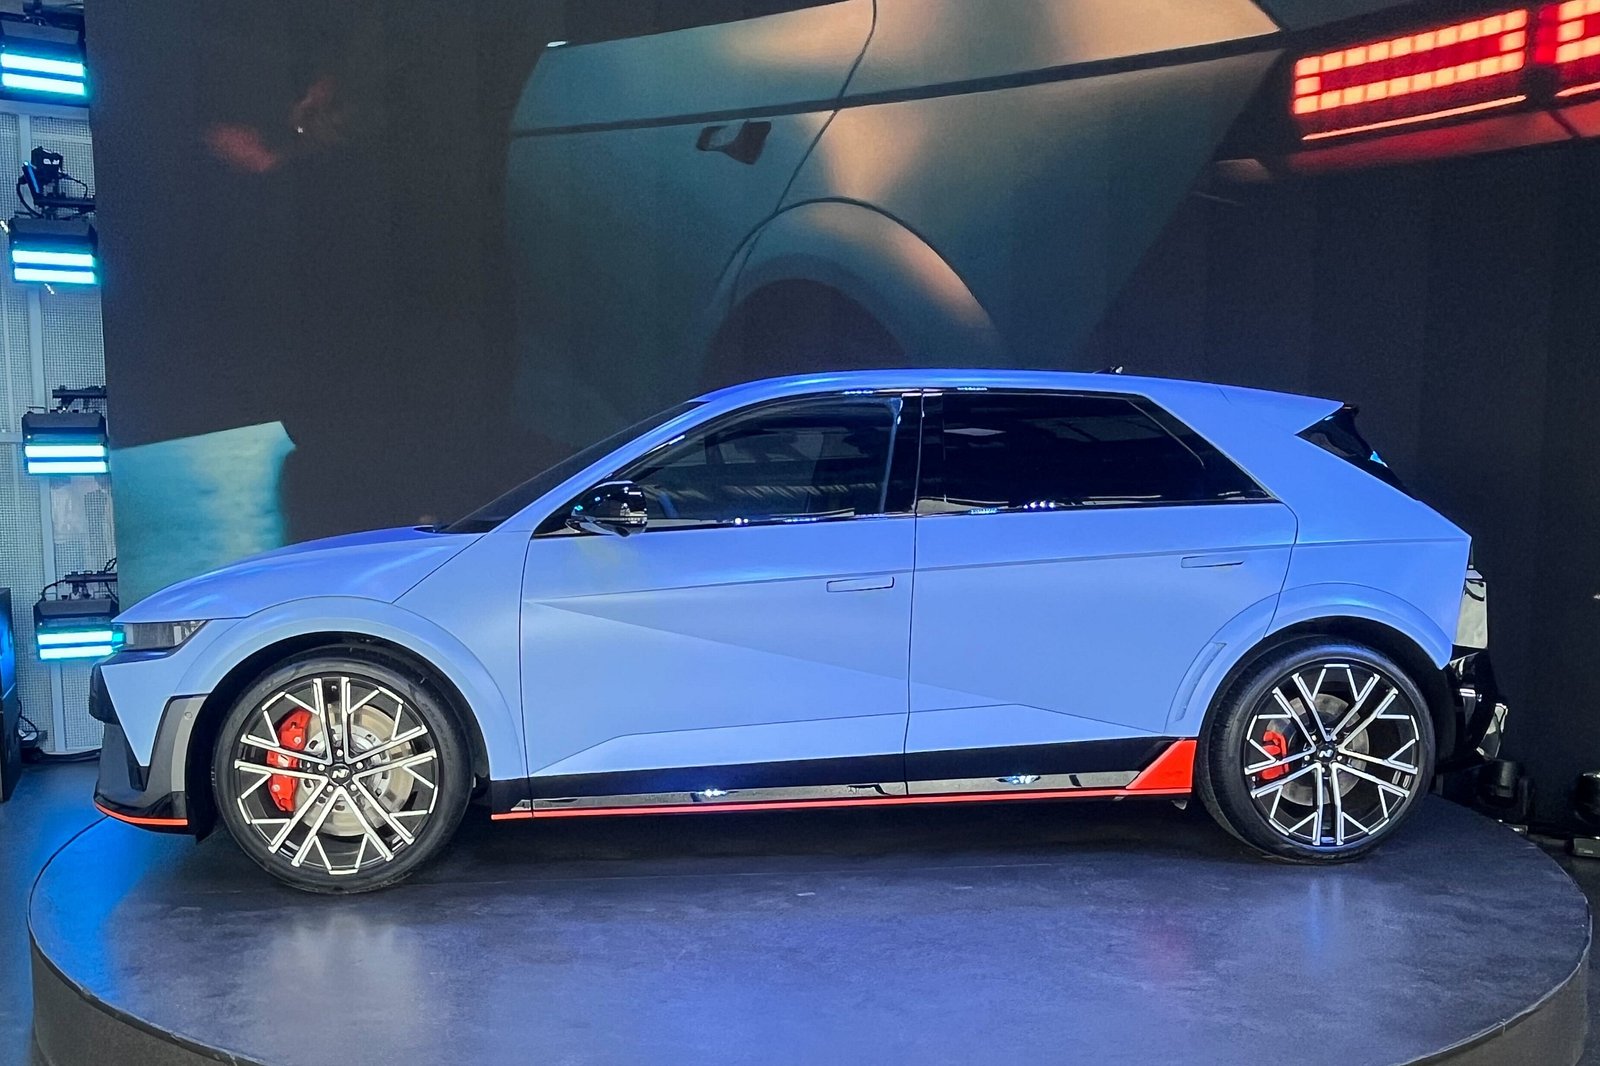 Hyundai Ioniq 5 N Revealed With 641 HP And Simulated DCT Gearbox